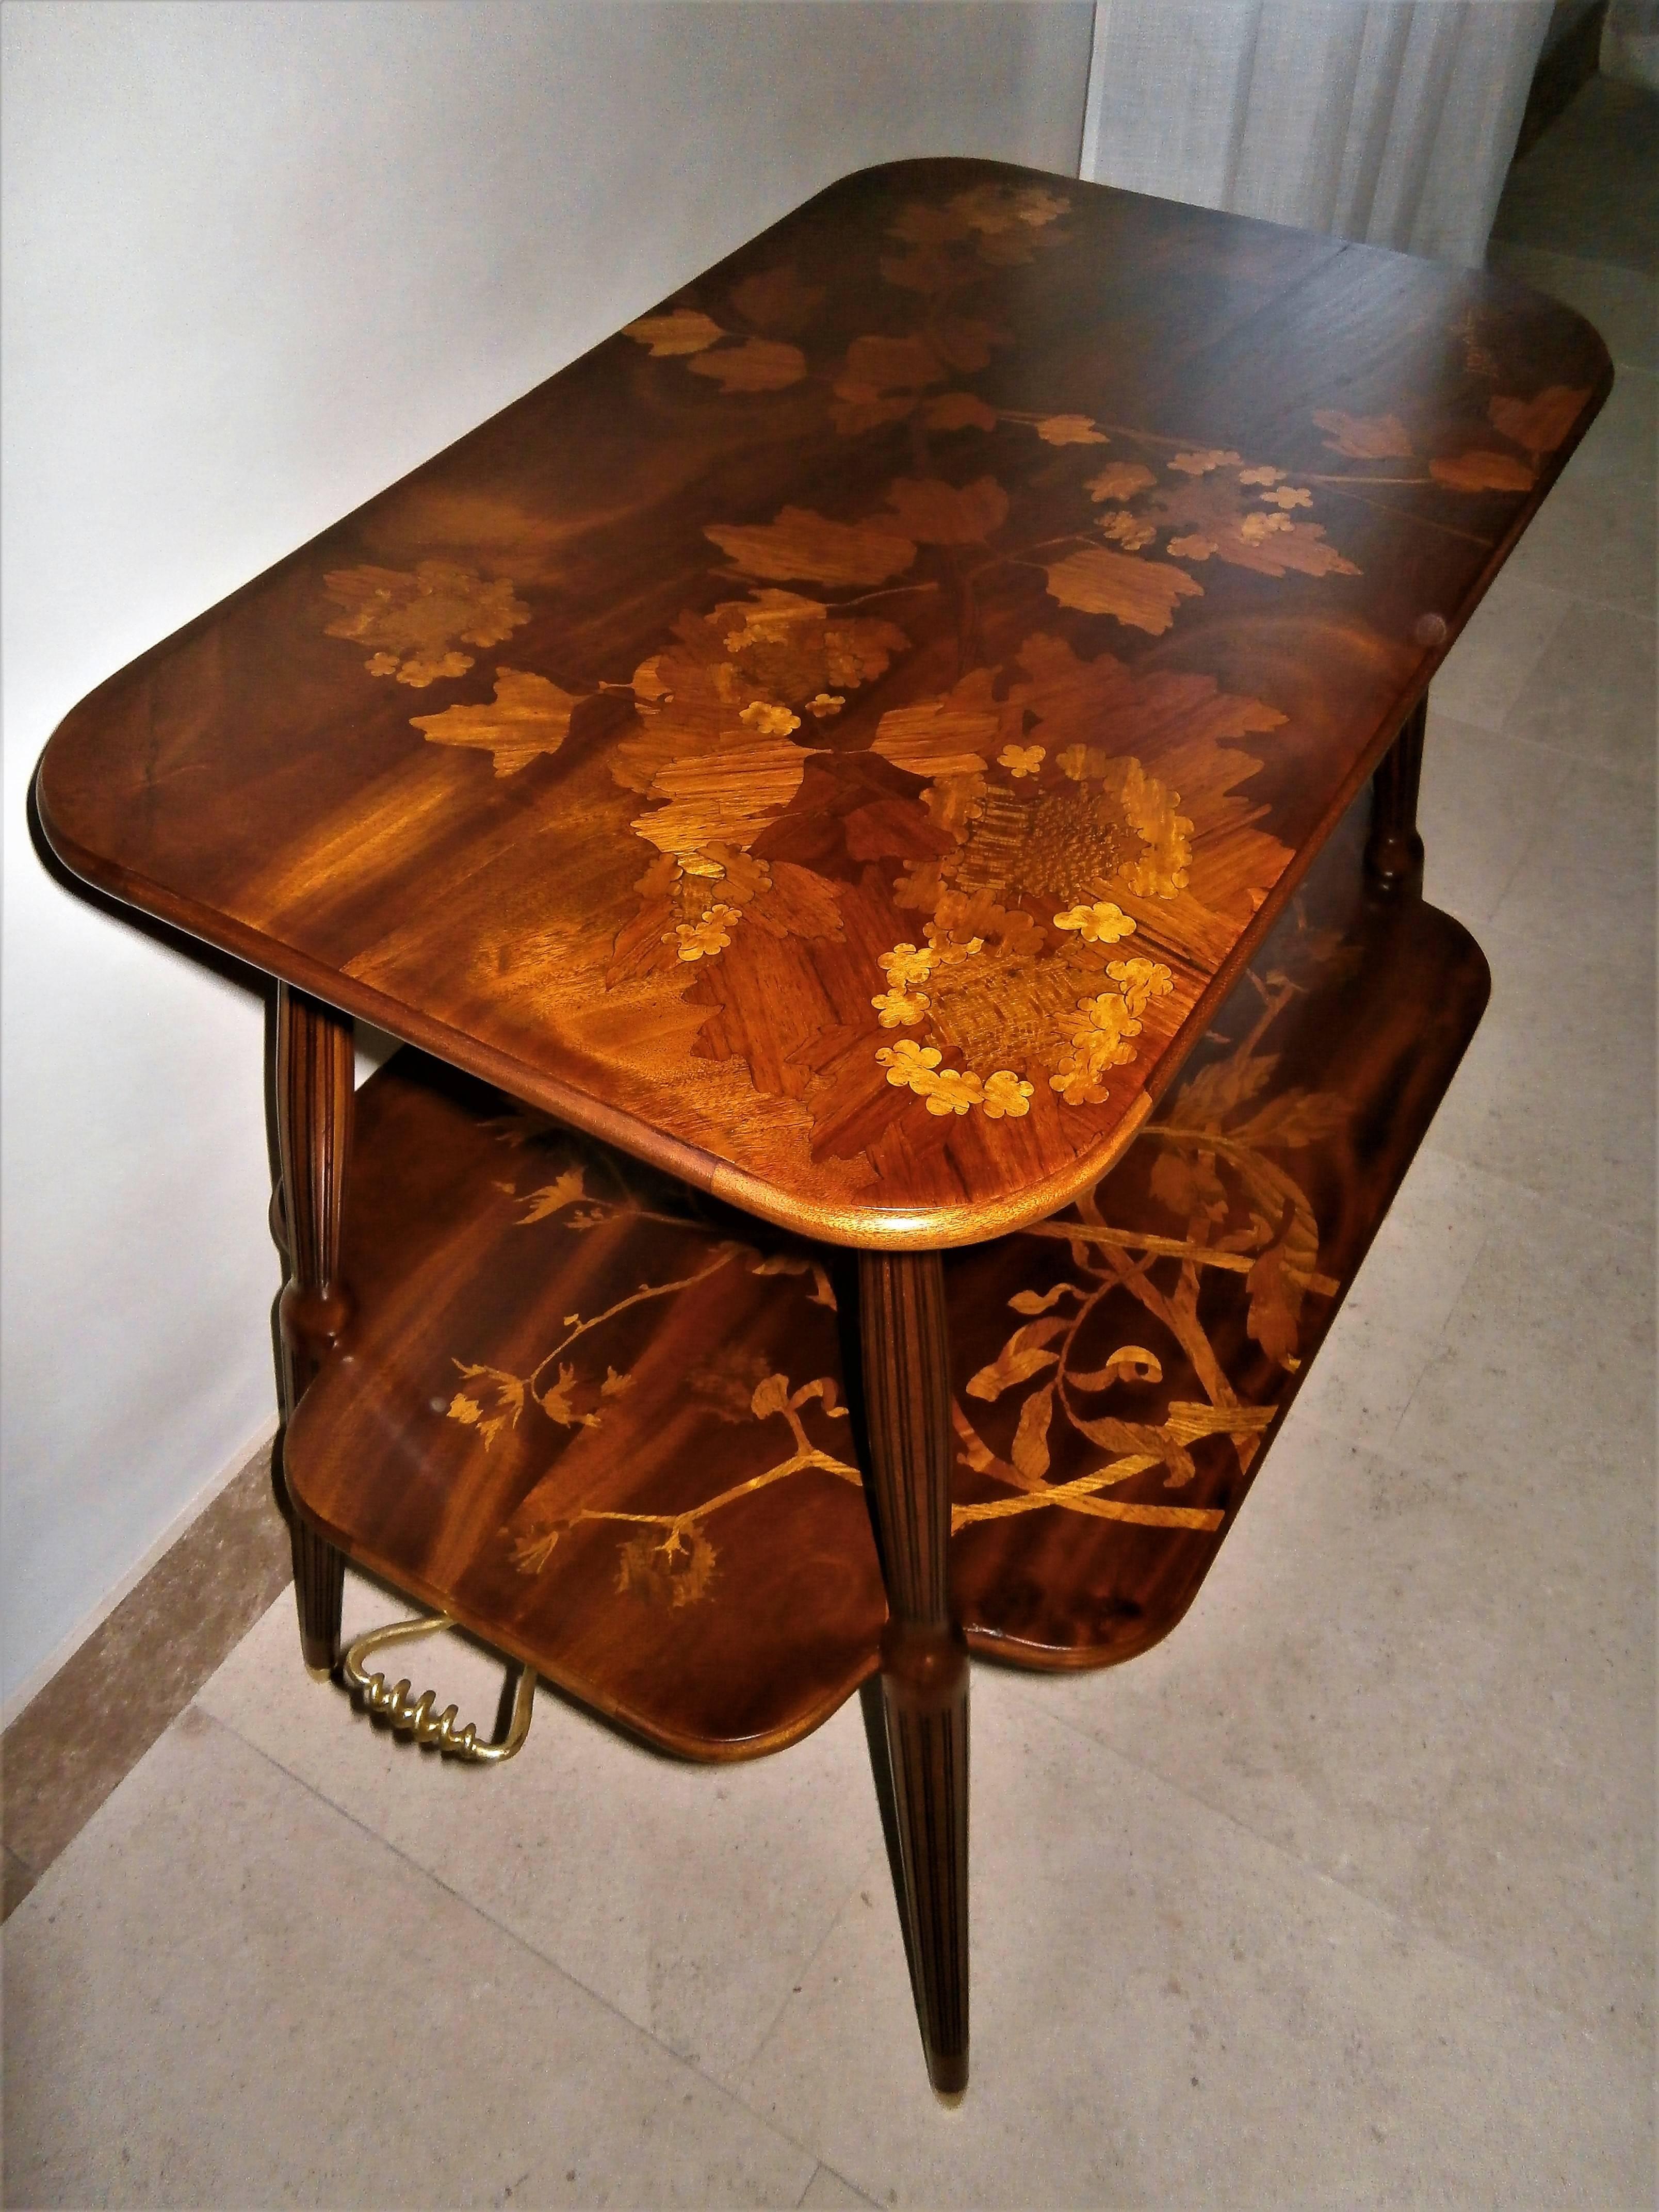 Early 20th Century Unique Louis Majorelle French Art Nouveau Marquetry Table, Signed